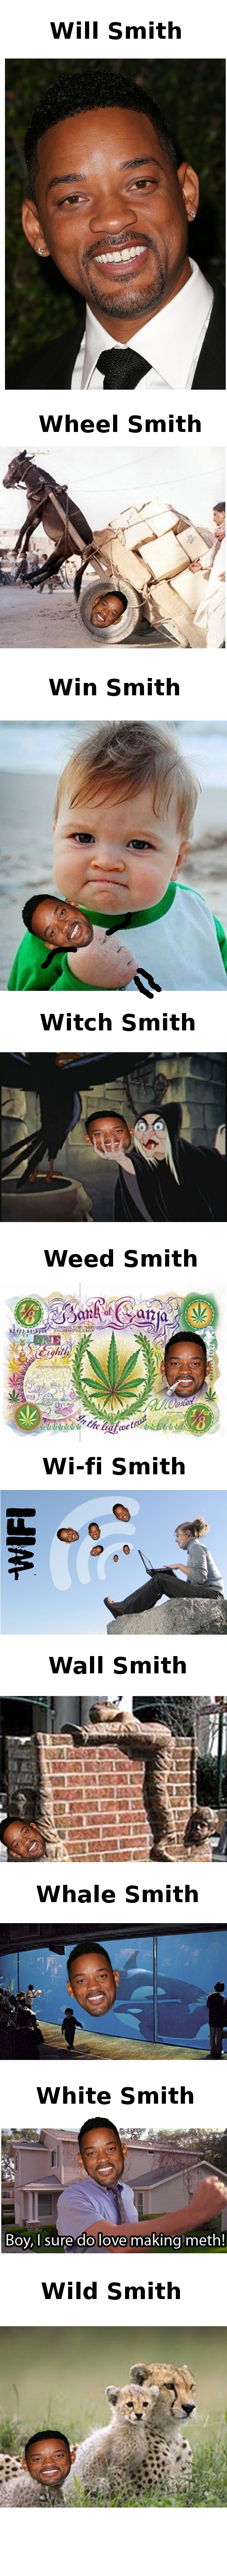 Yeah, i just put will smith's face on some shitty pictures